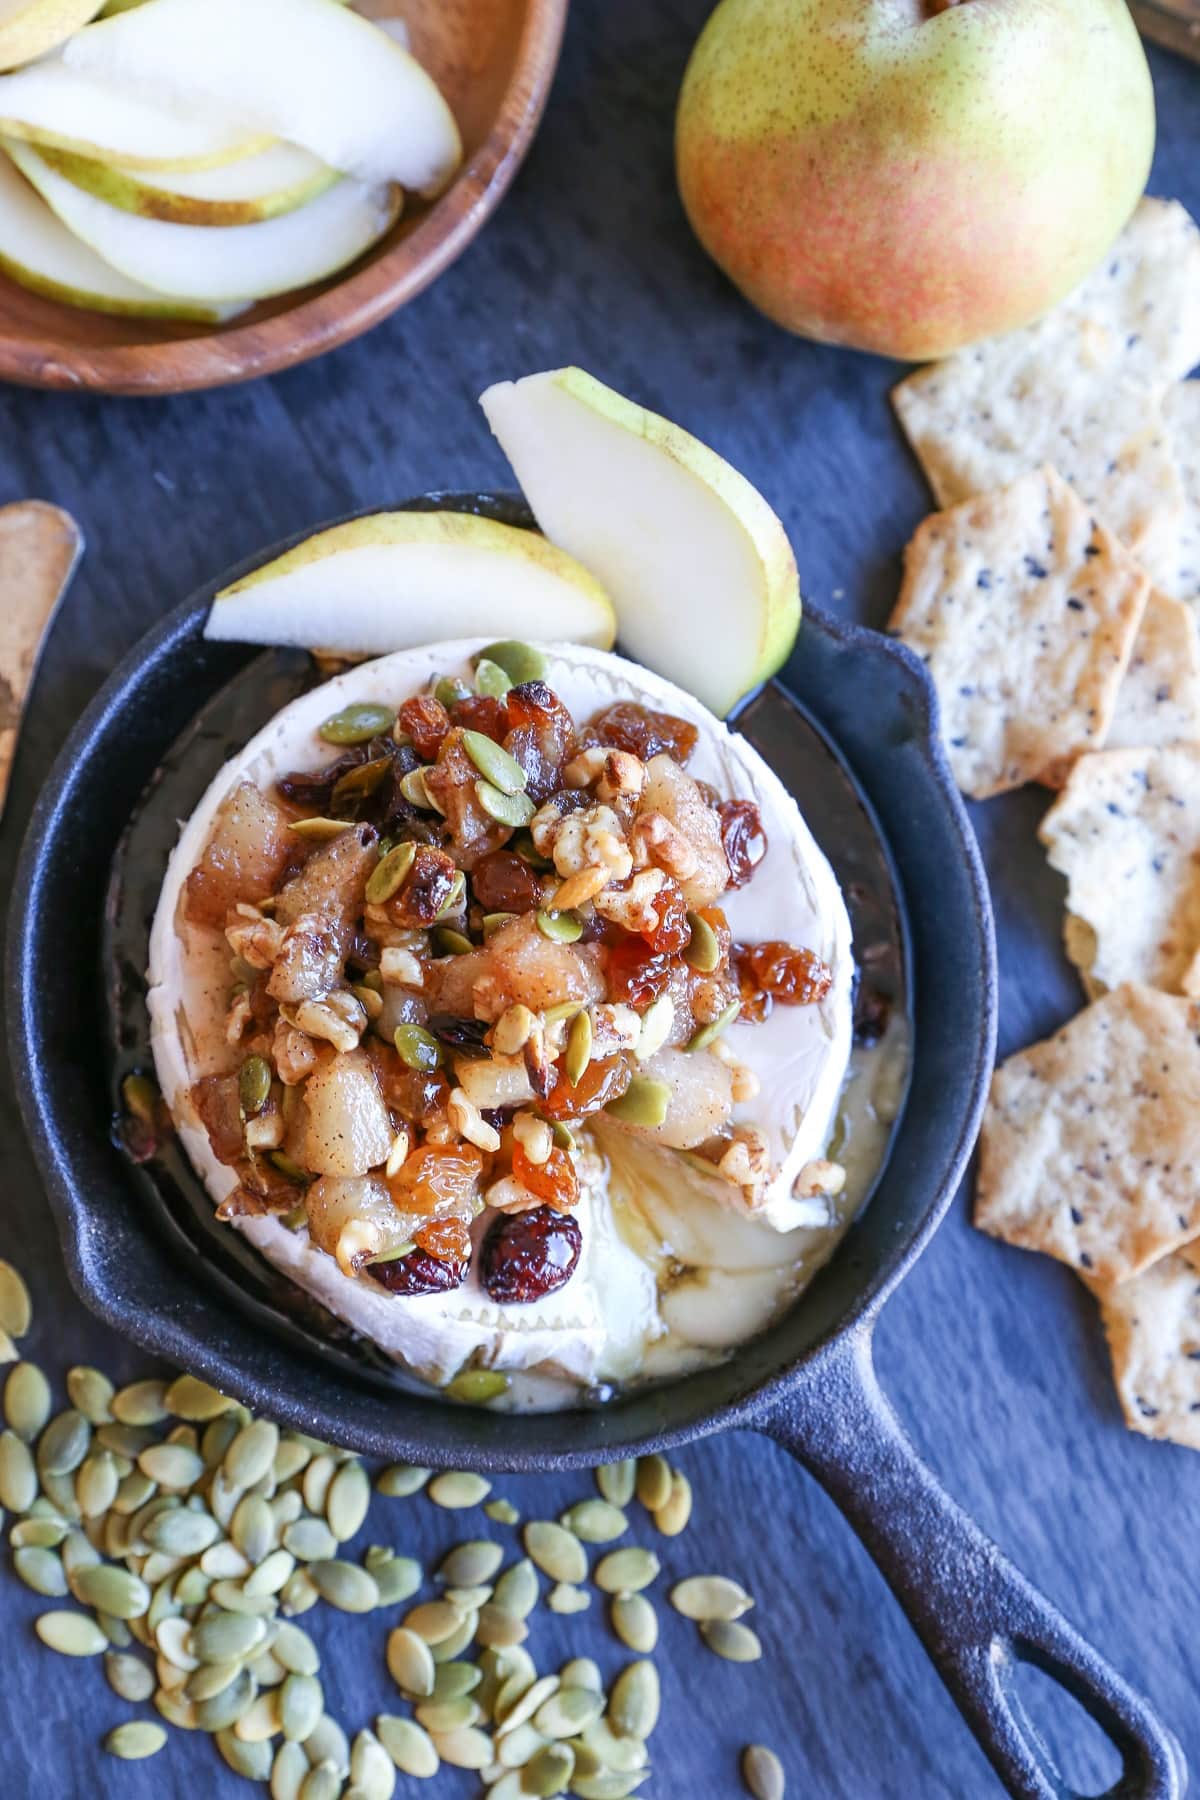 Maple-Spiced Pear Baked Brie with Walnuts, Pumpkin Seeds, and Golden Raisins served with sliced pear and gluten-free crackers. A lovely fall-inspired appetizer!